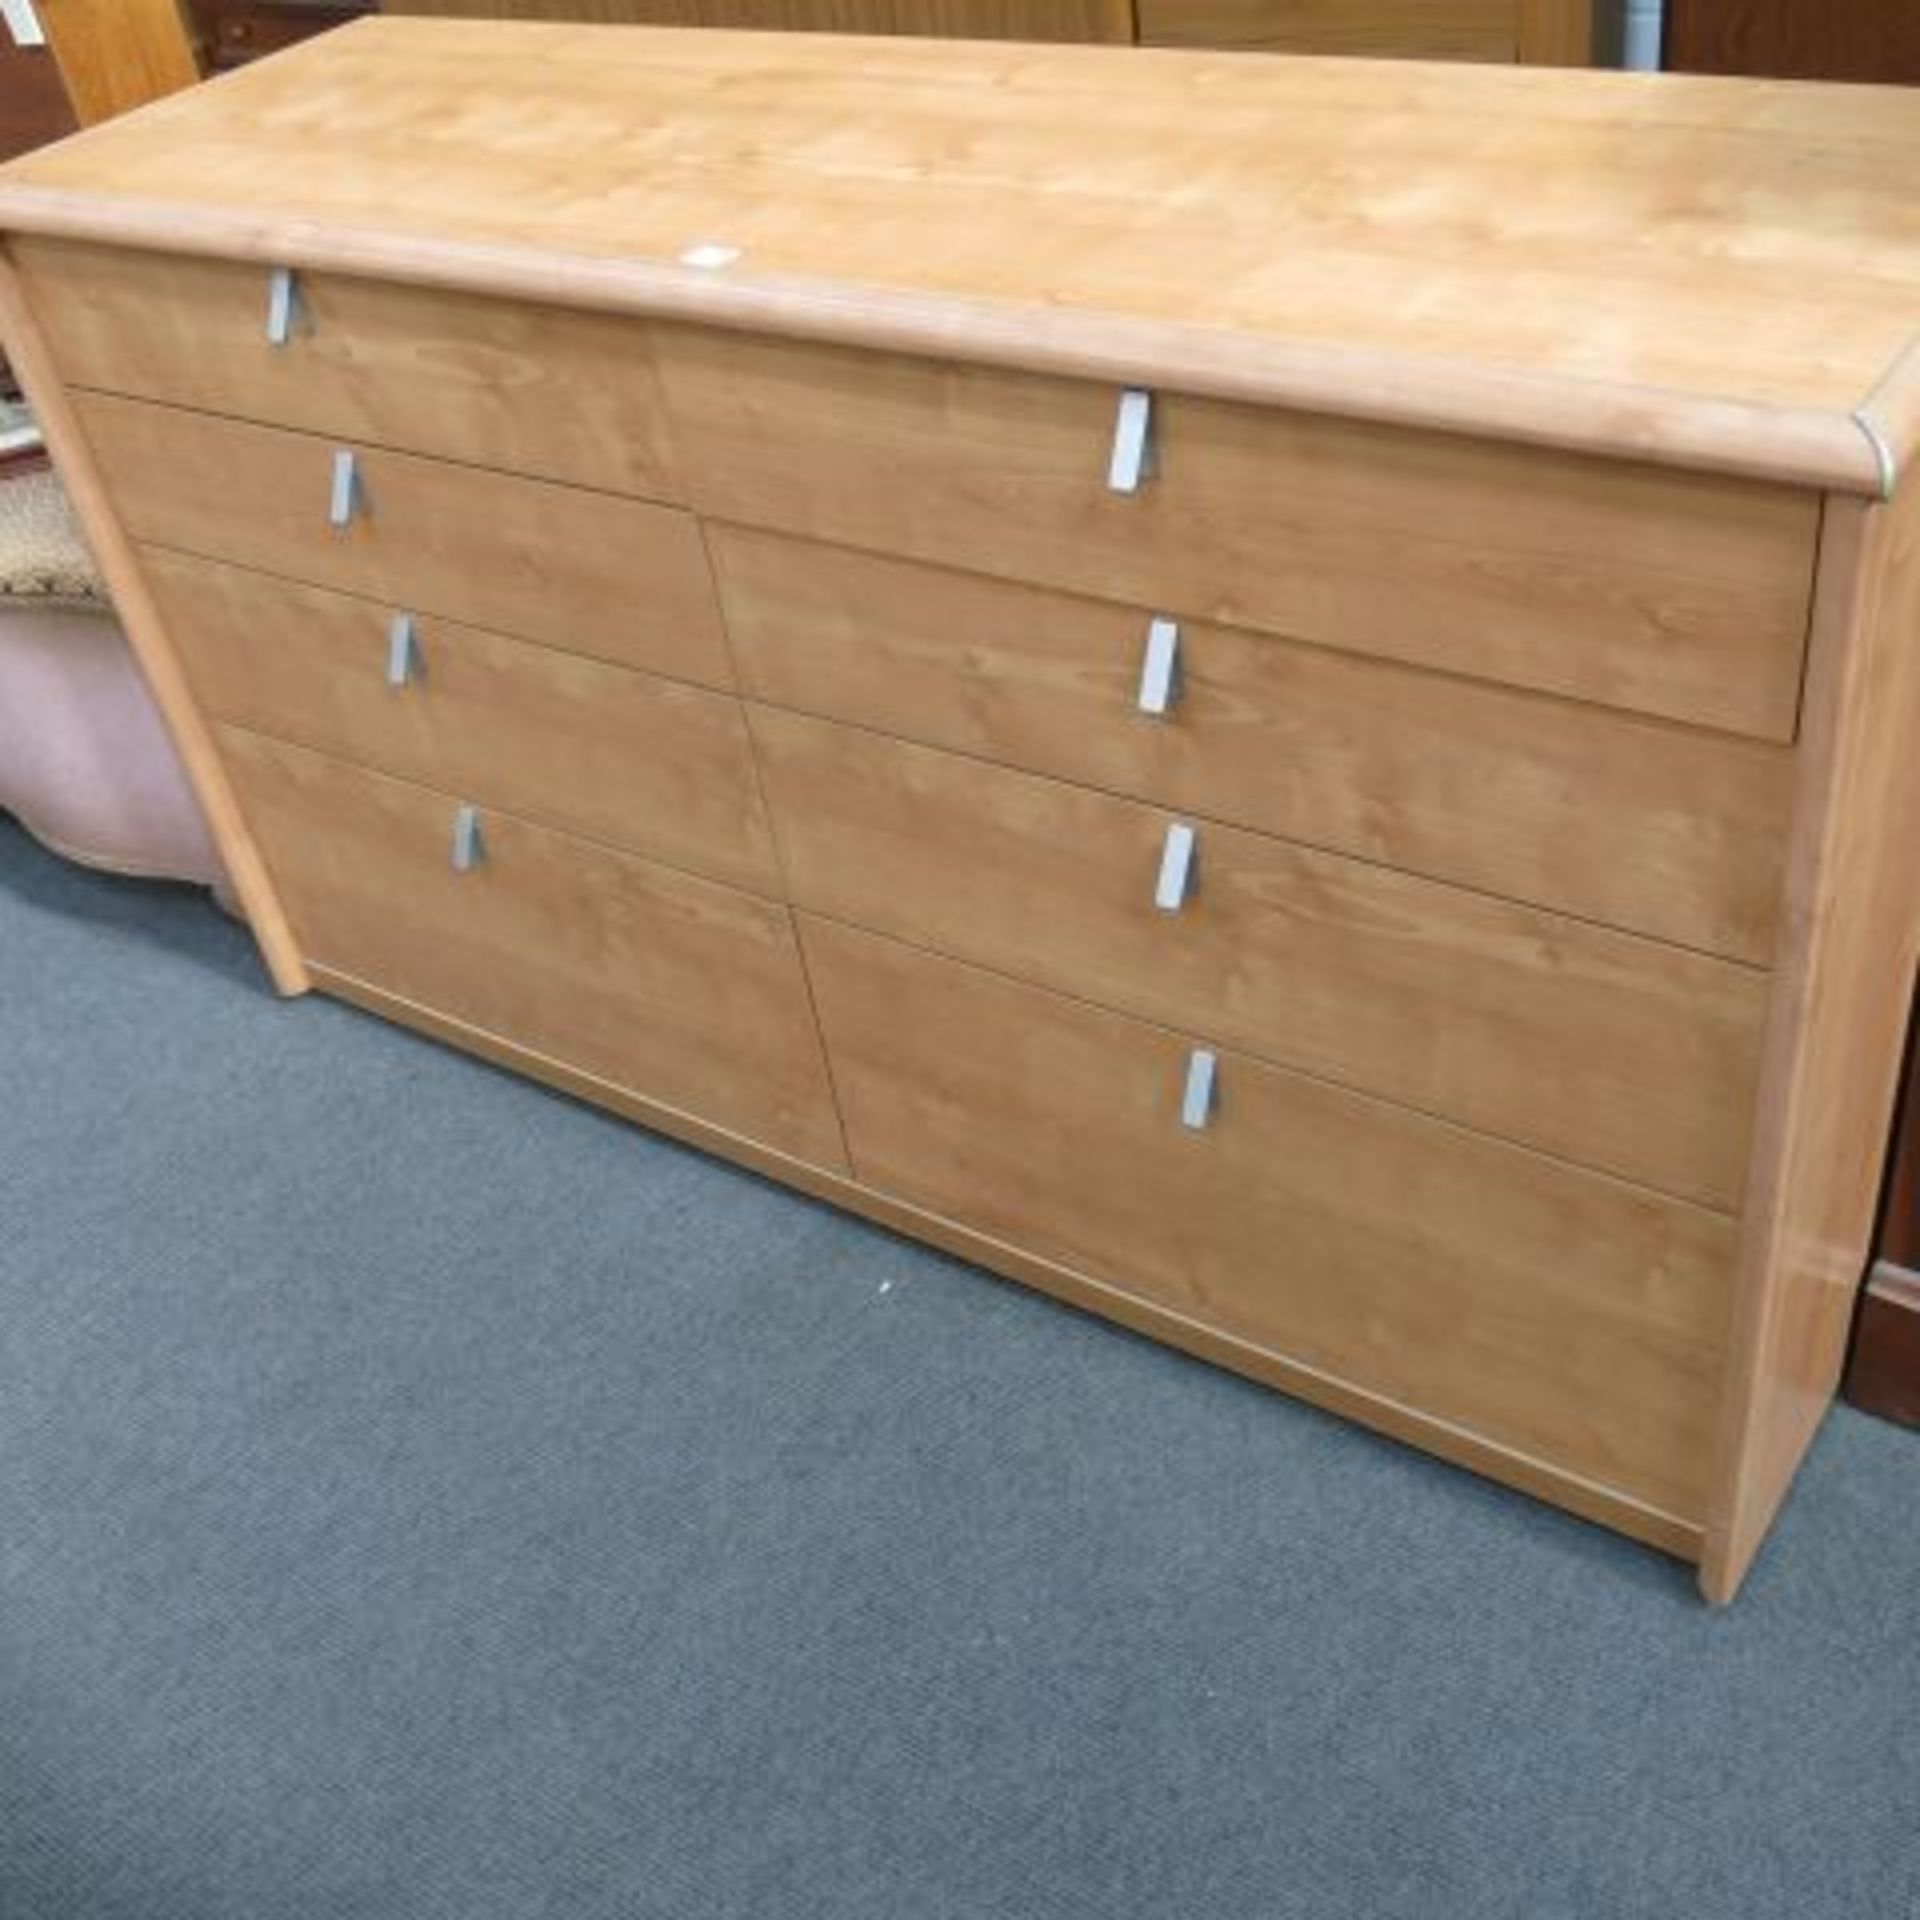 A Light Wood Finish Sideboard with Light Drawers.  145cms. (est. £30-£50)